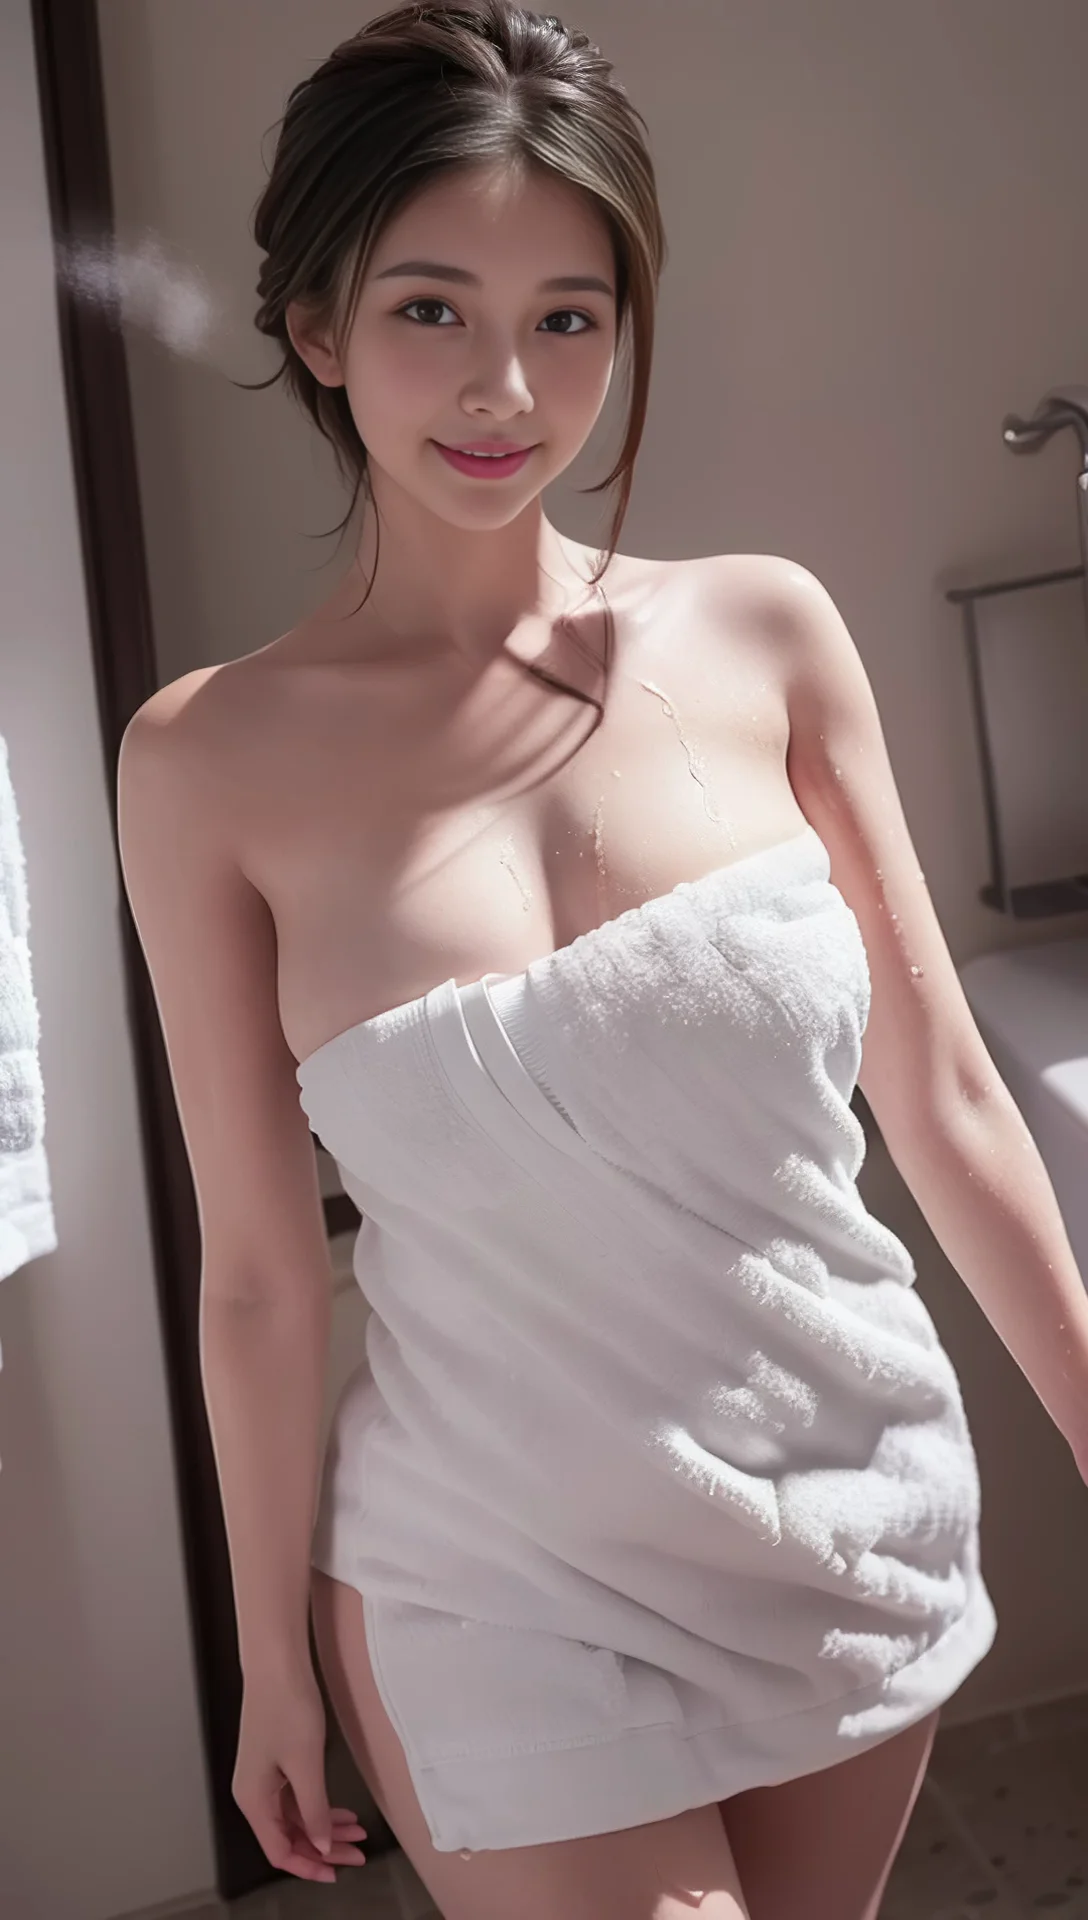 24 Fresh out of bath, girl in bath towel Images 14